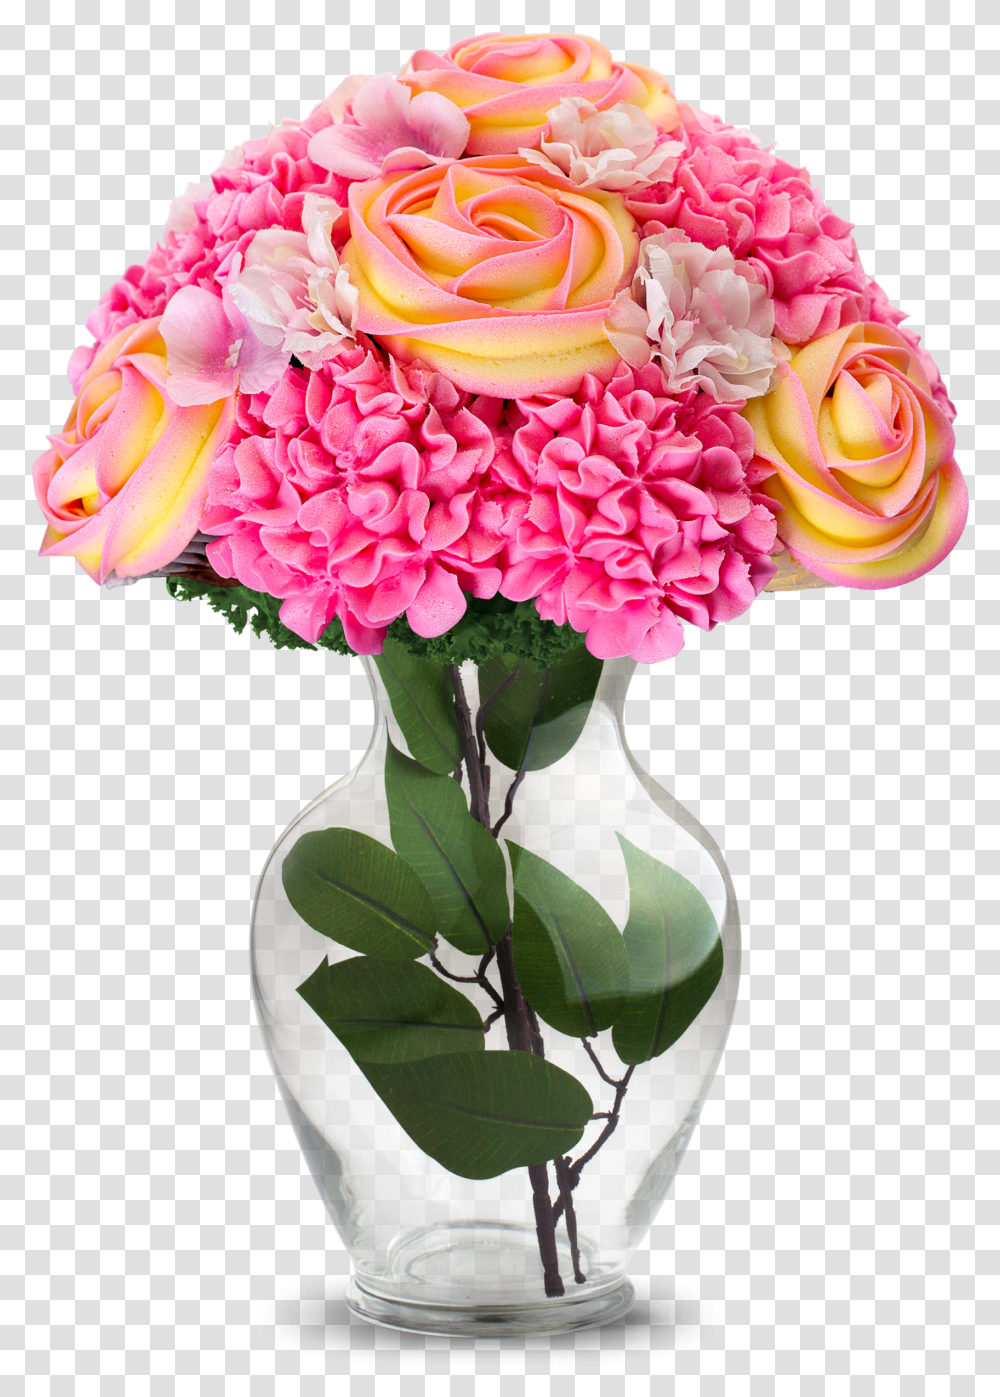 Baked Bouquet Flower & Cupcake Bouquets For Delivery Evening Gown Baked Bouquet Transparent Png